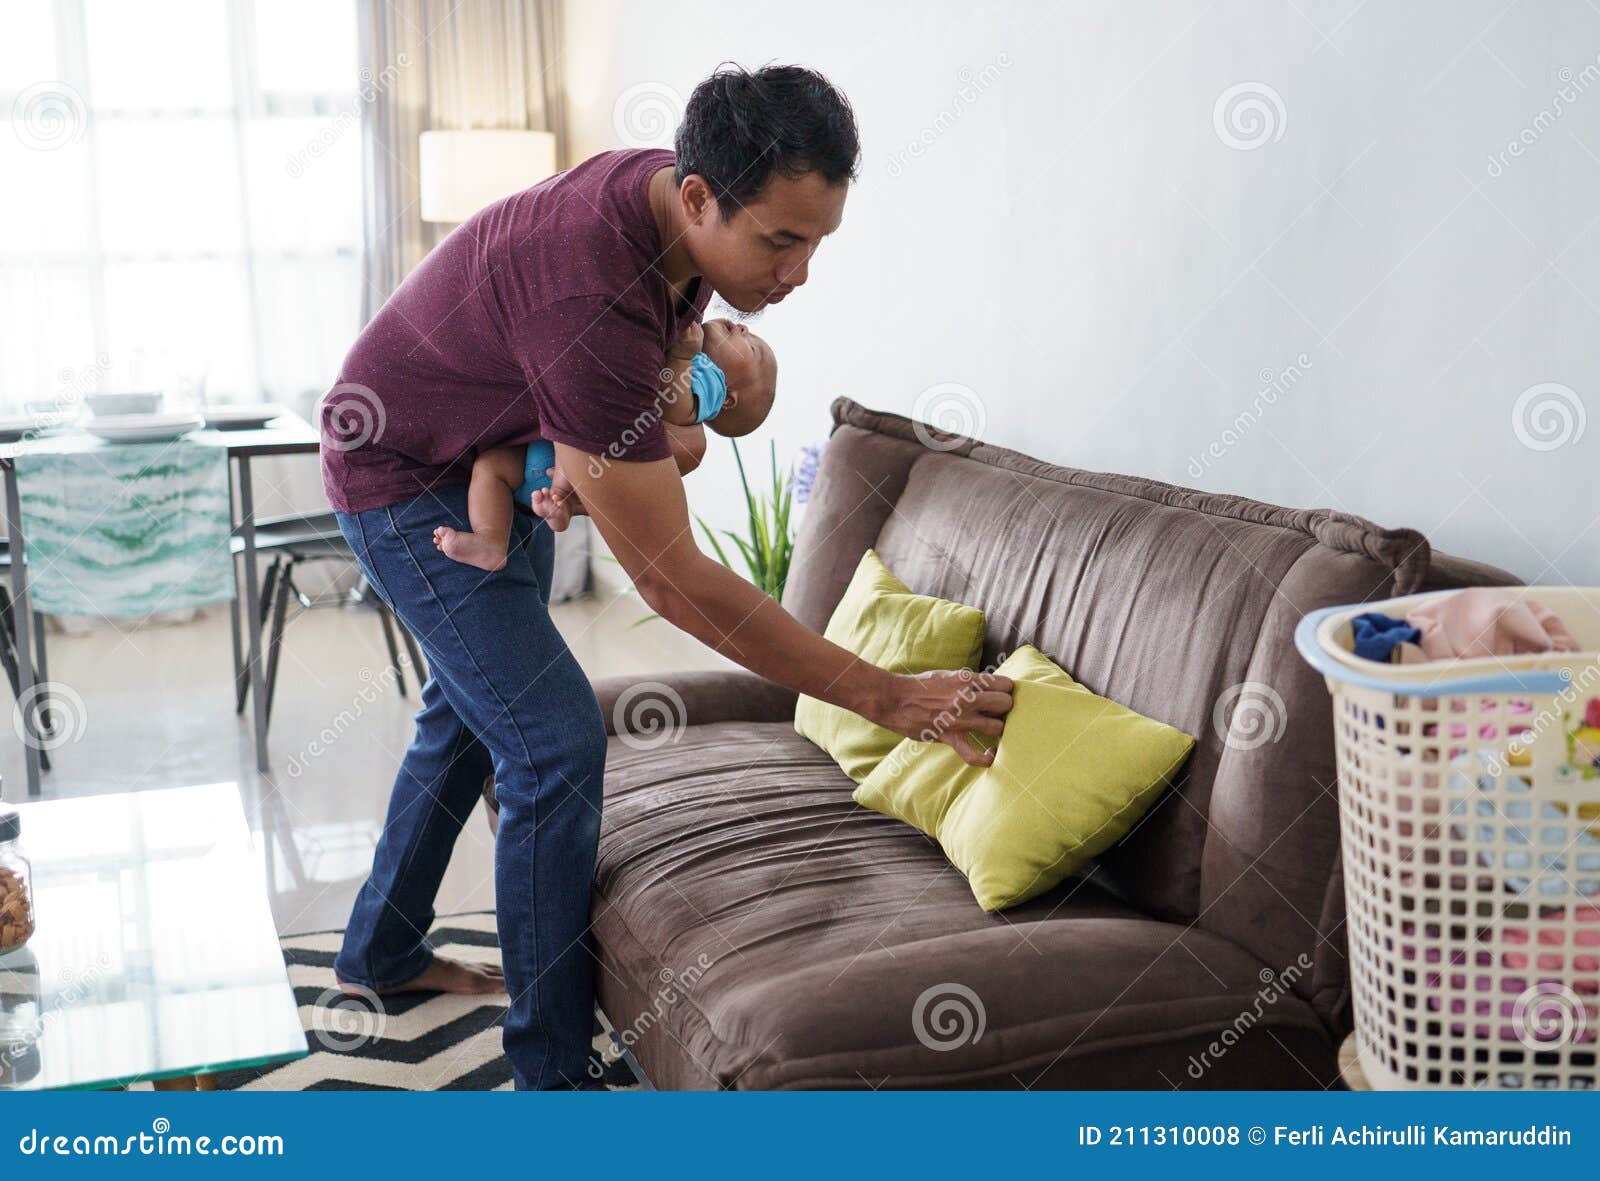 https://thumbs.dreamstime.com/z/father-cleaning-floor-using-broom-carrying-his-infant-baby-portrait-asian-211310008.jpg